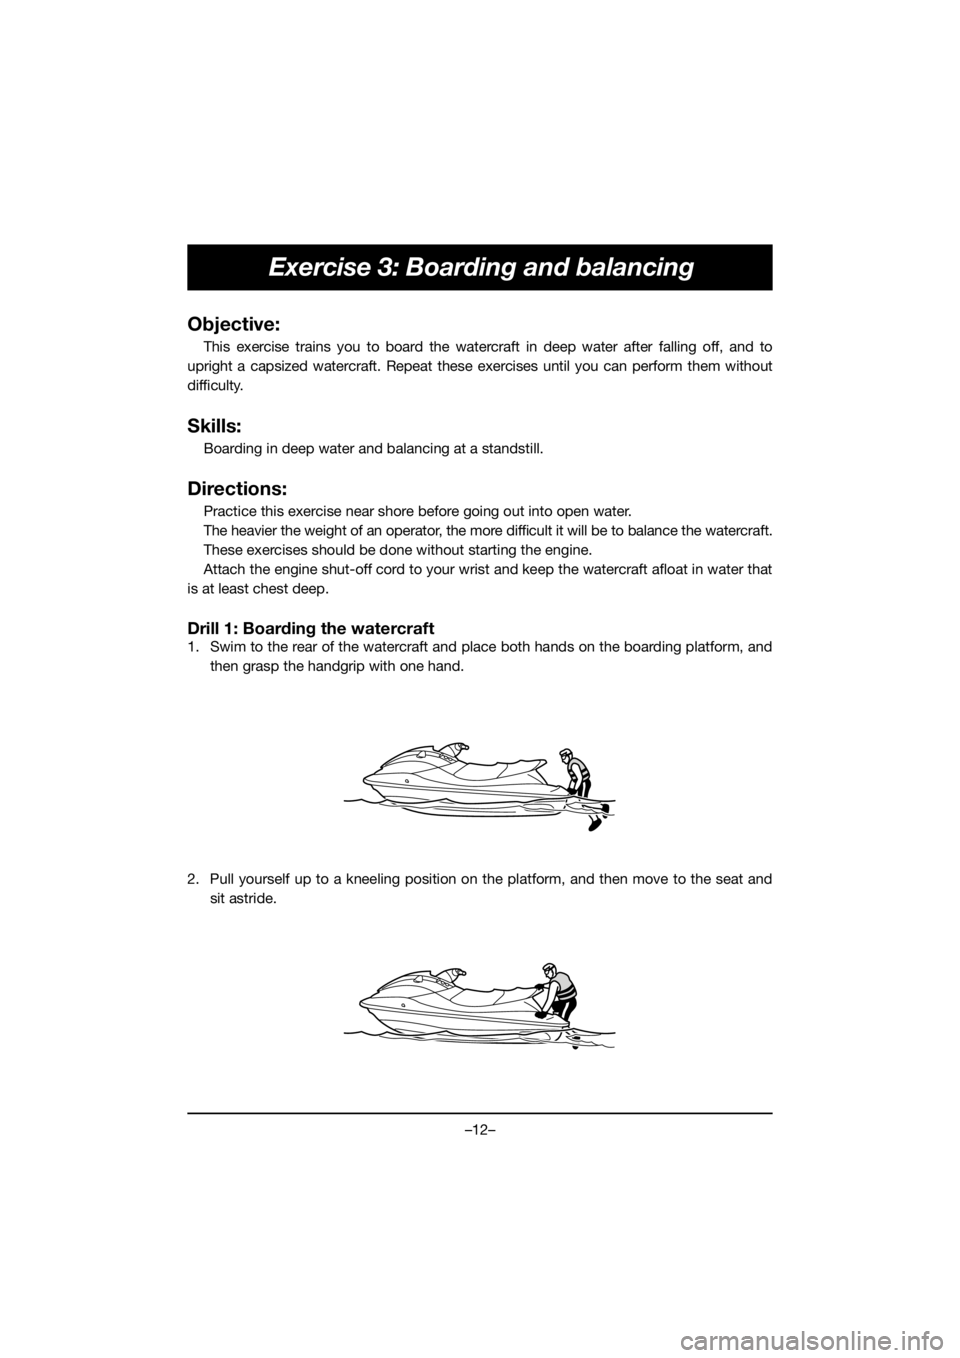 YAMAHA VX-C 2021  Manuale de Empleo (in Spanish) –12–
Exercise 3: Boarding and balancing
Objective:
This exercise trains you to board the watercraft in deep water after falling off, and to
upright a capsized watercraft. Repeat these exercises un